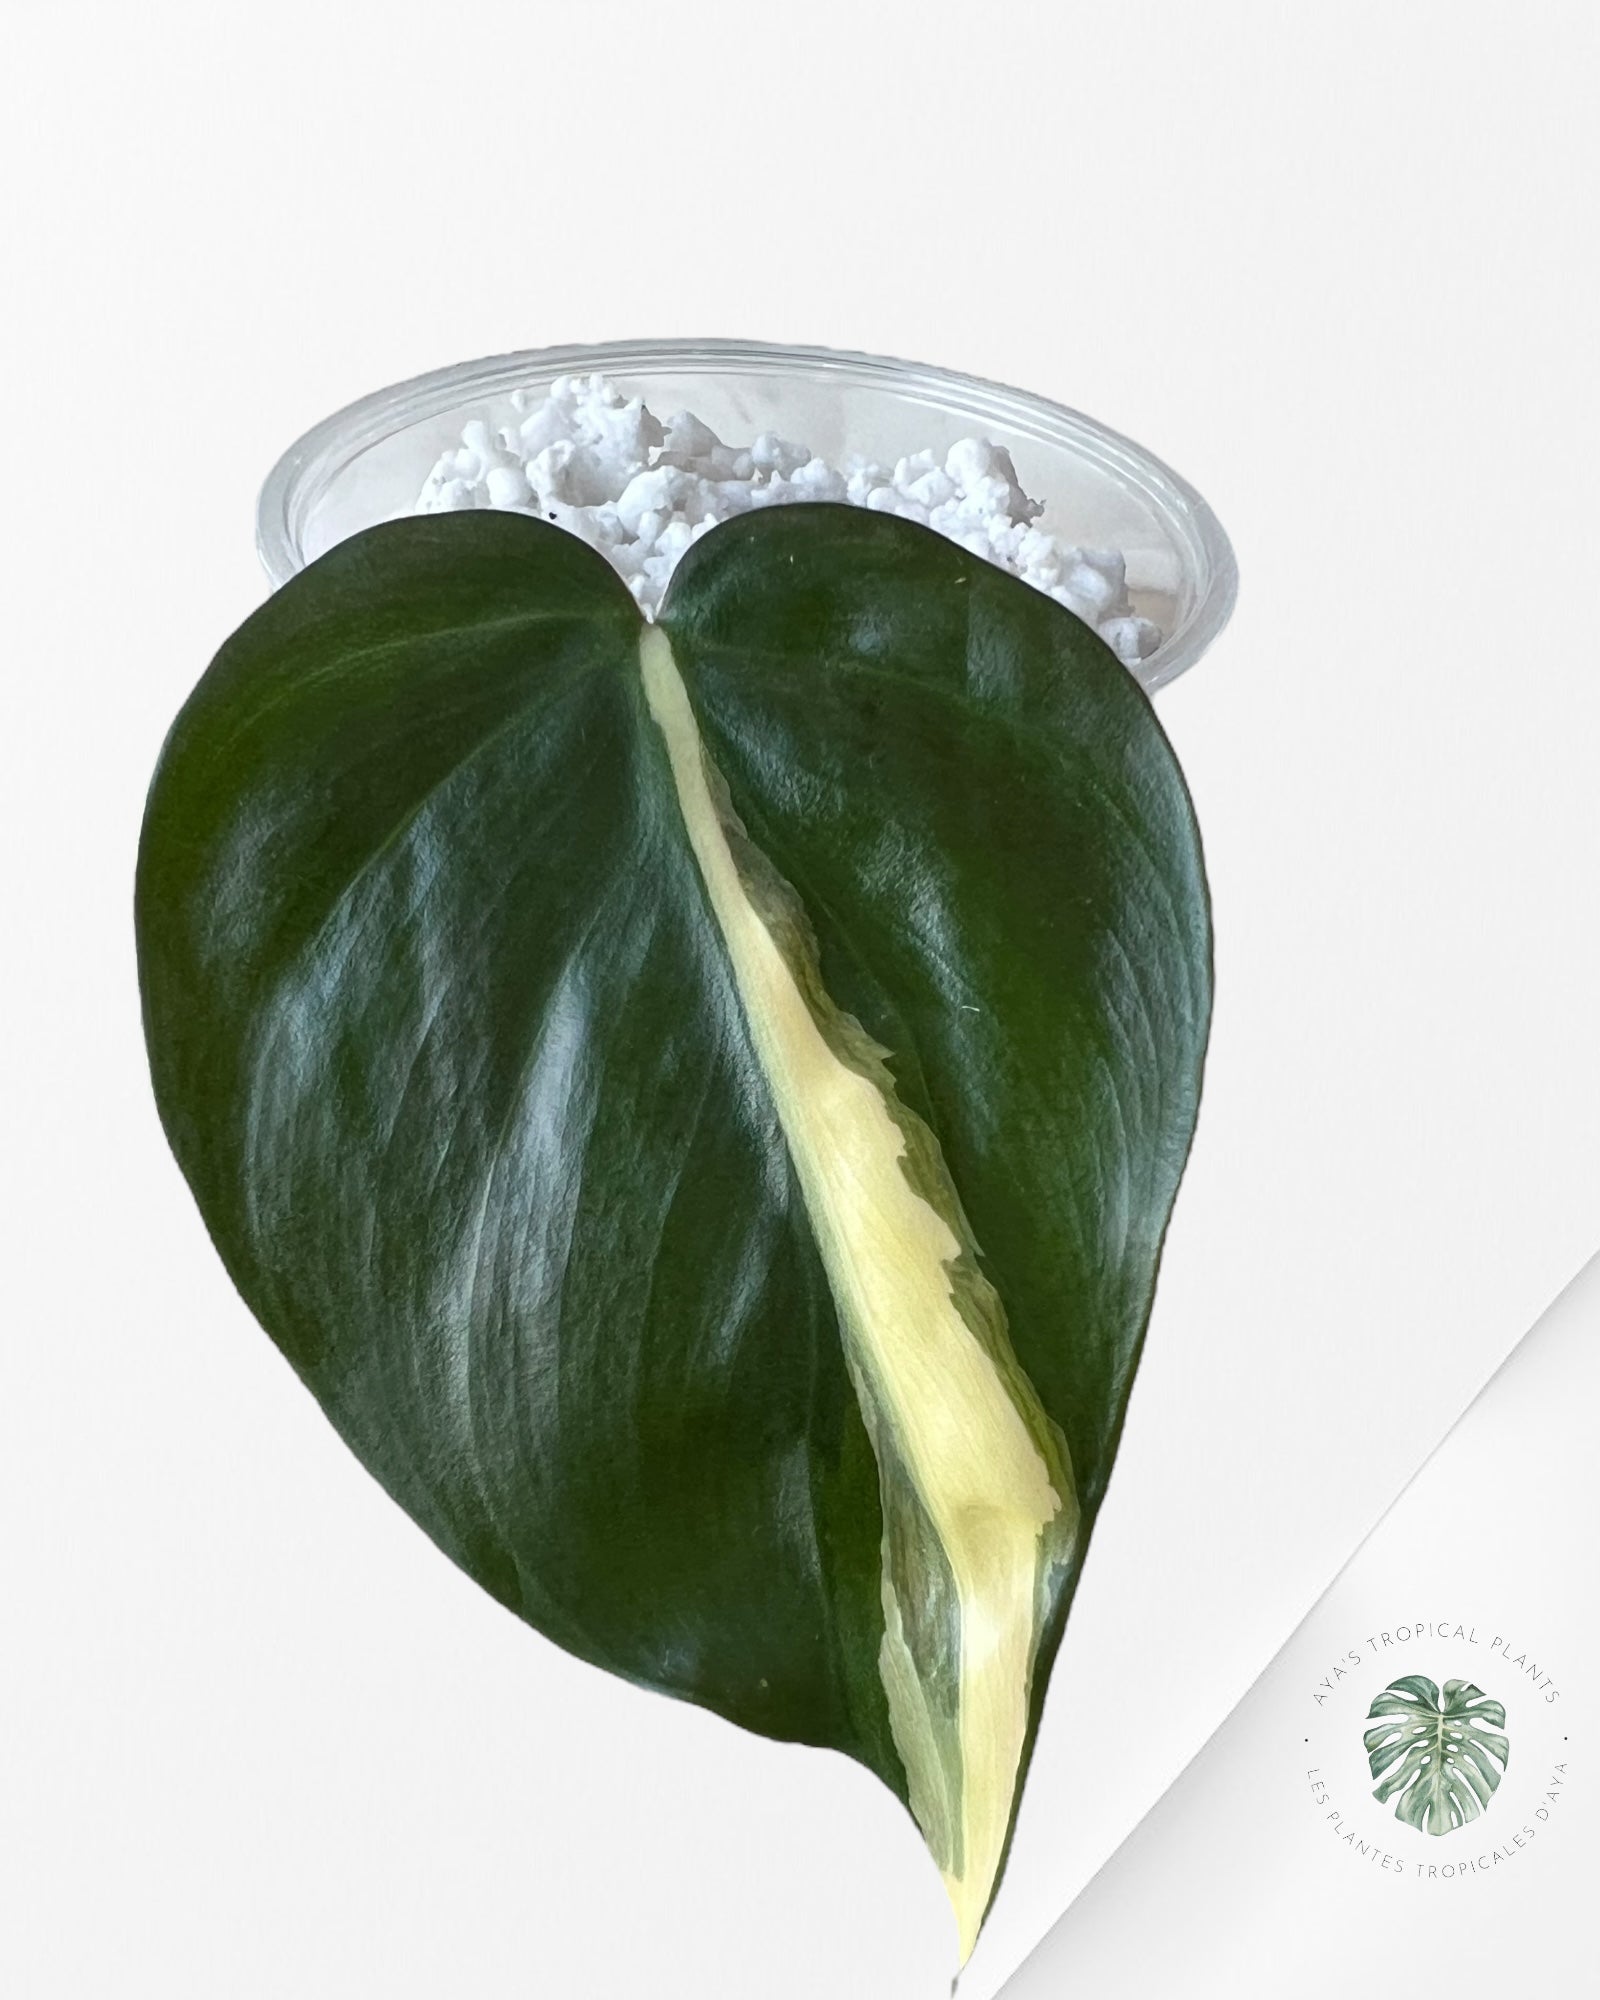 Philodendron Hederaceum 'Rio'-2246